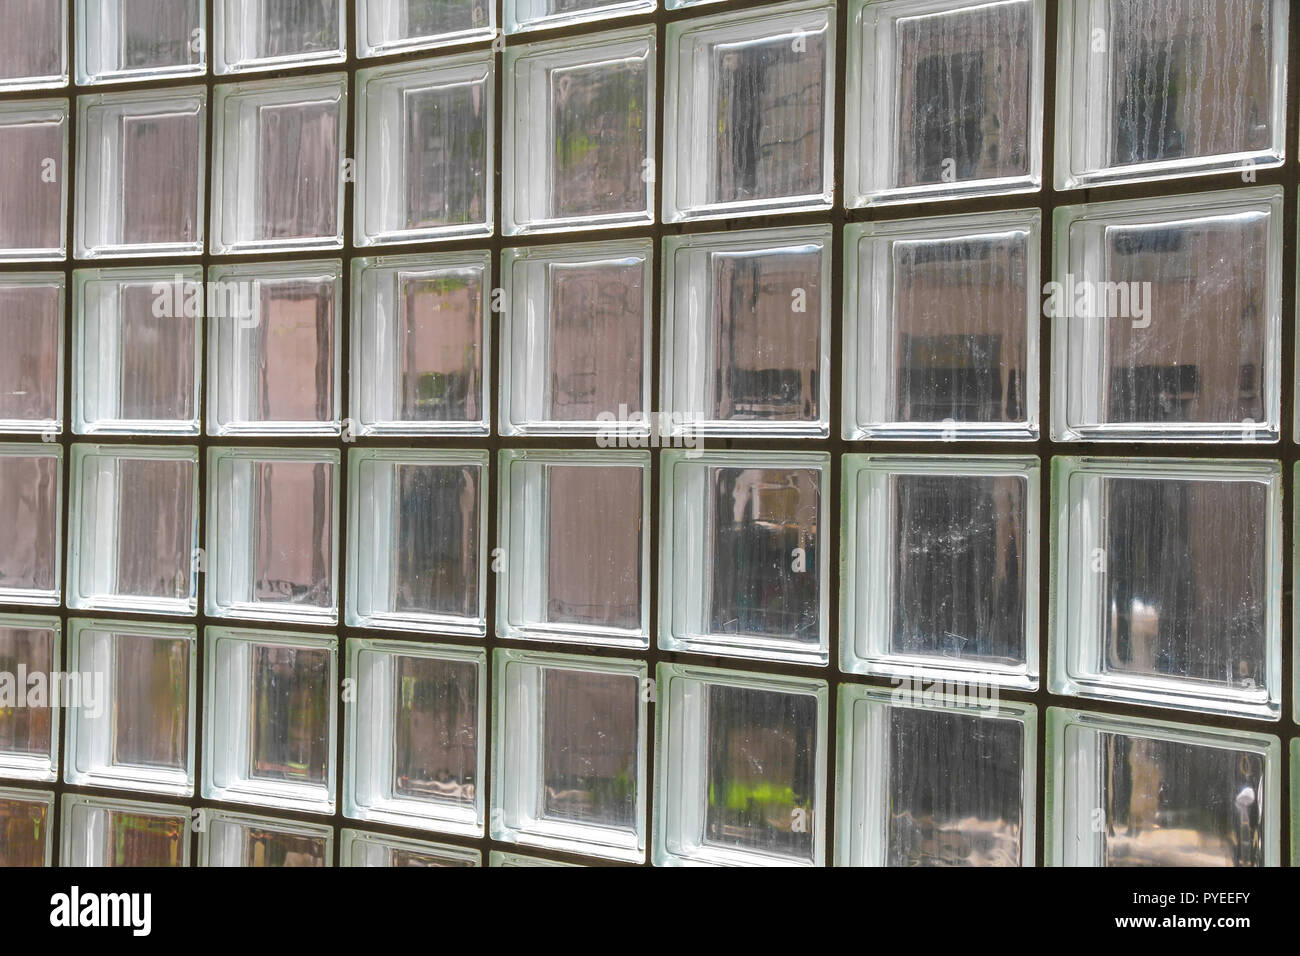 Closeup view on a wall made of glass tiles. Stock Photo